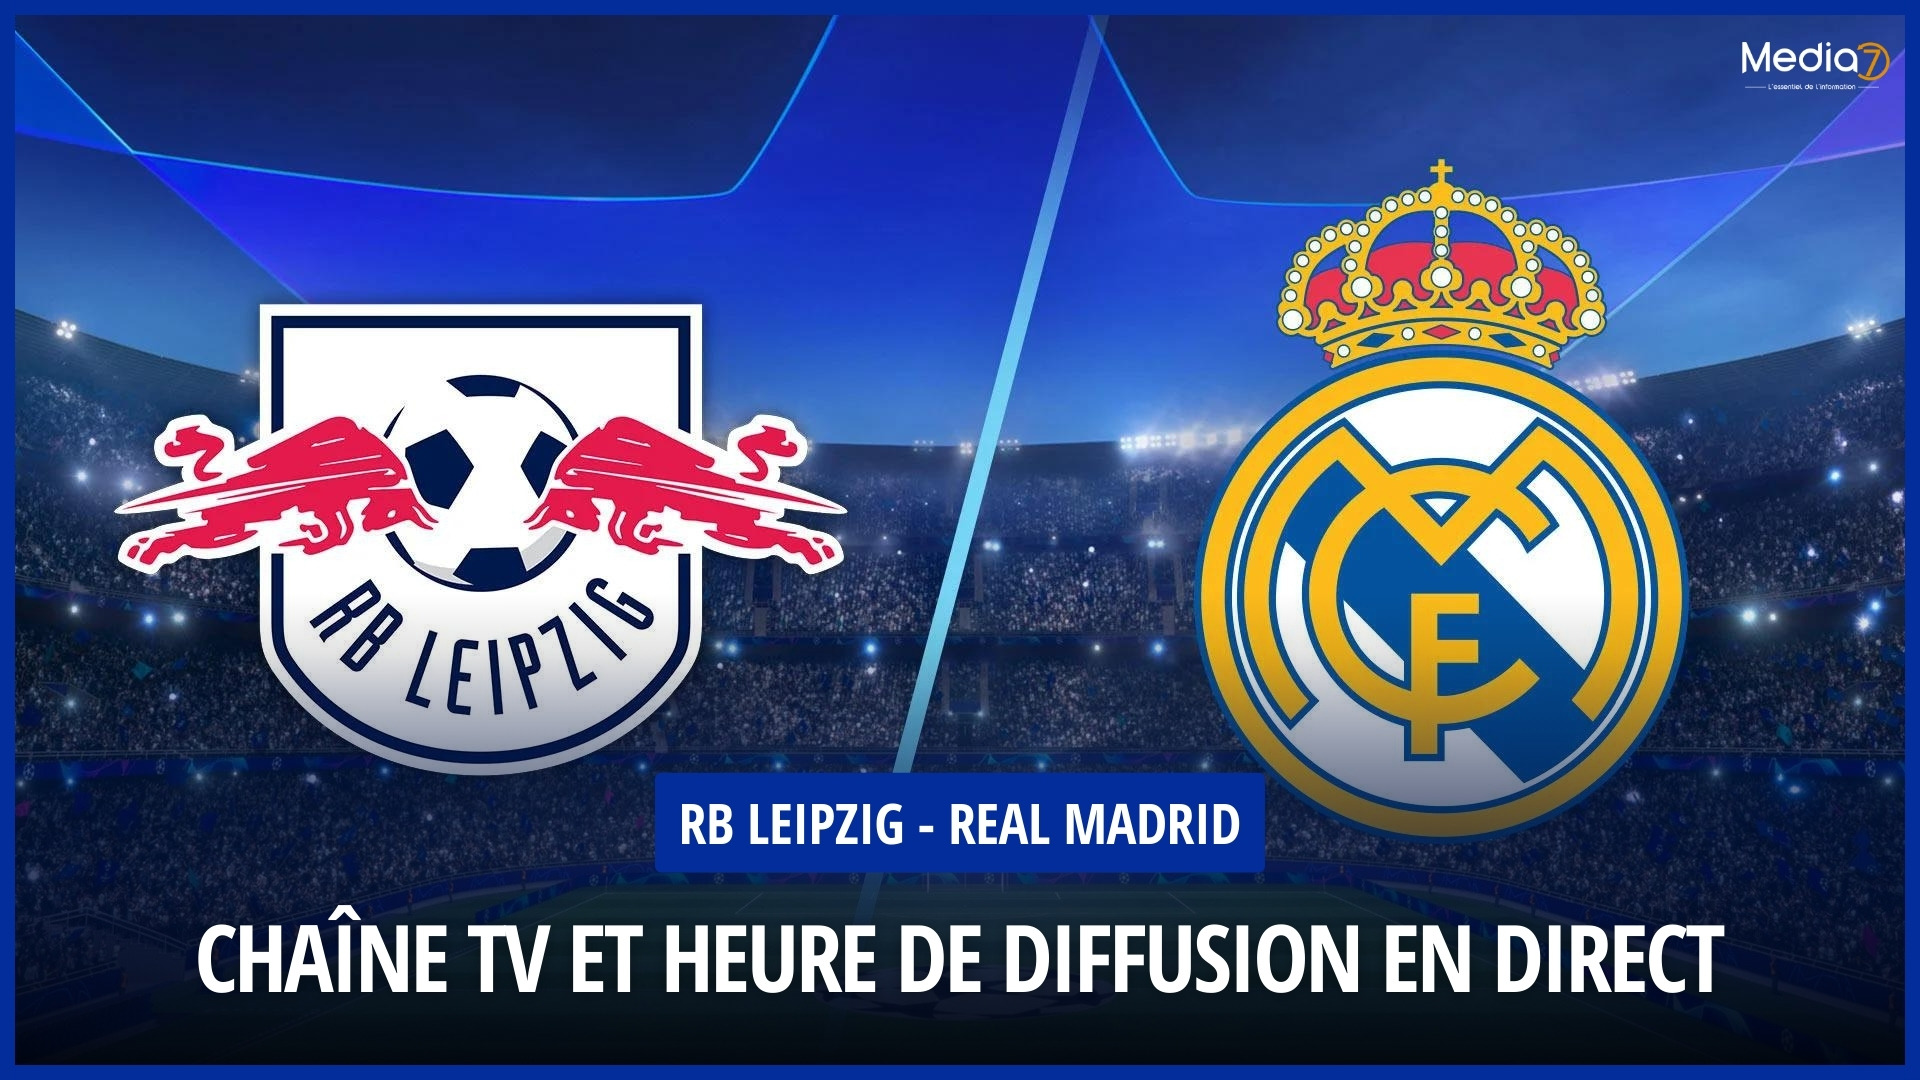 RB Leipzig - Real Madrid match live: TV channel and broadcast time - Media7